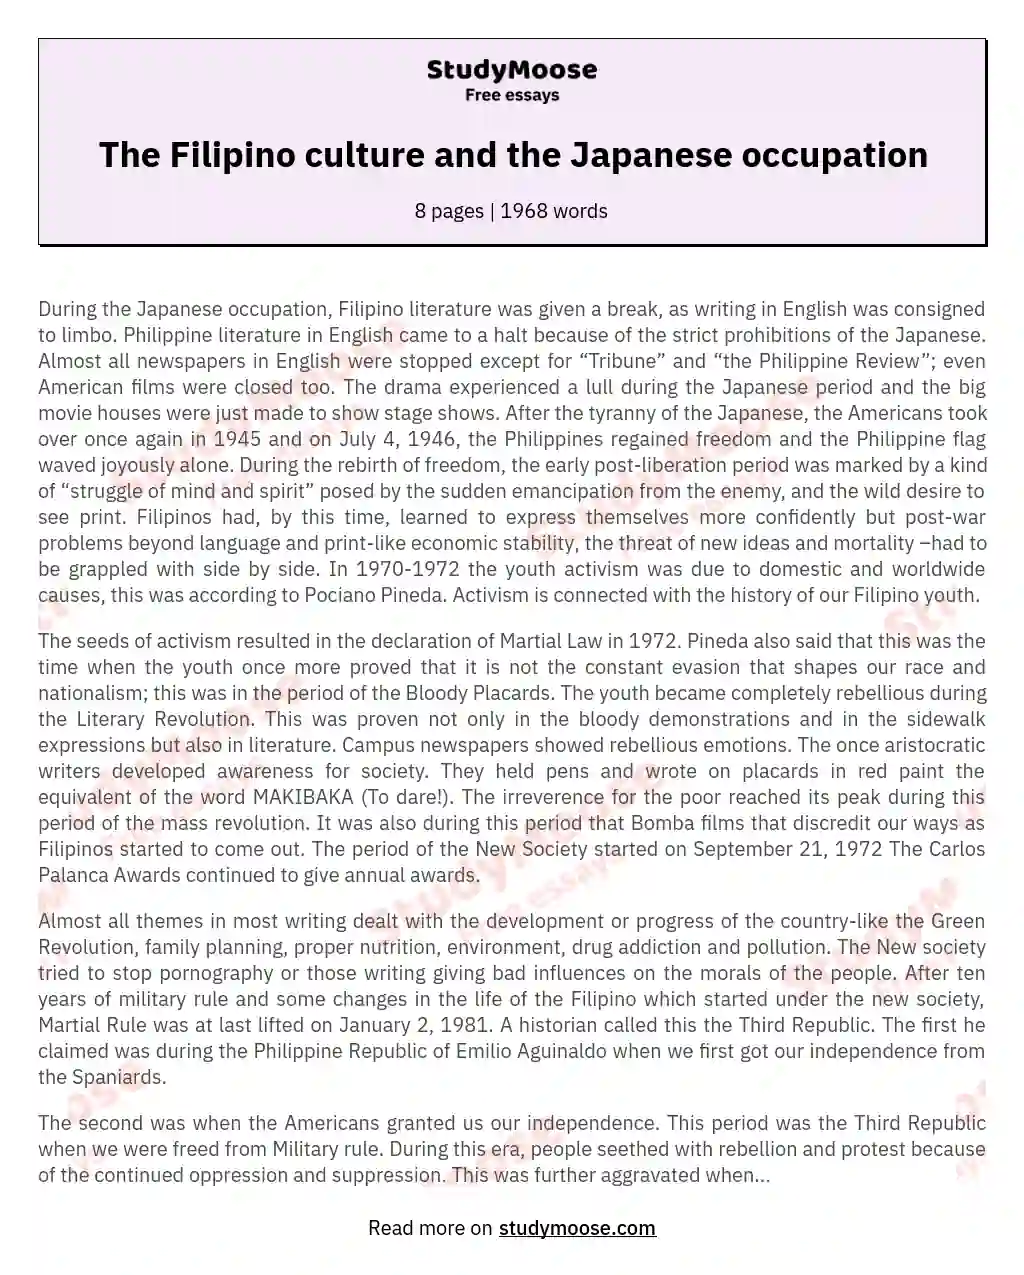 essay about japanese period in the philippines